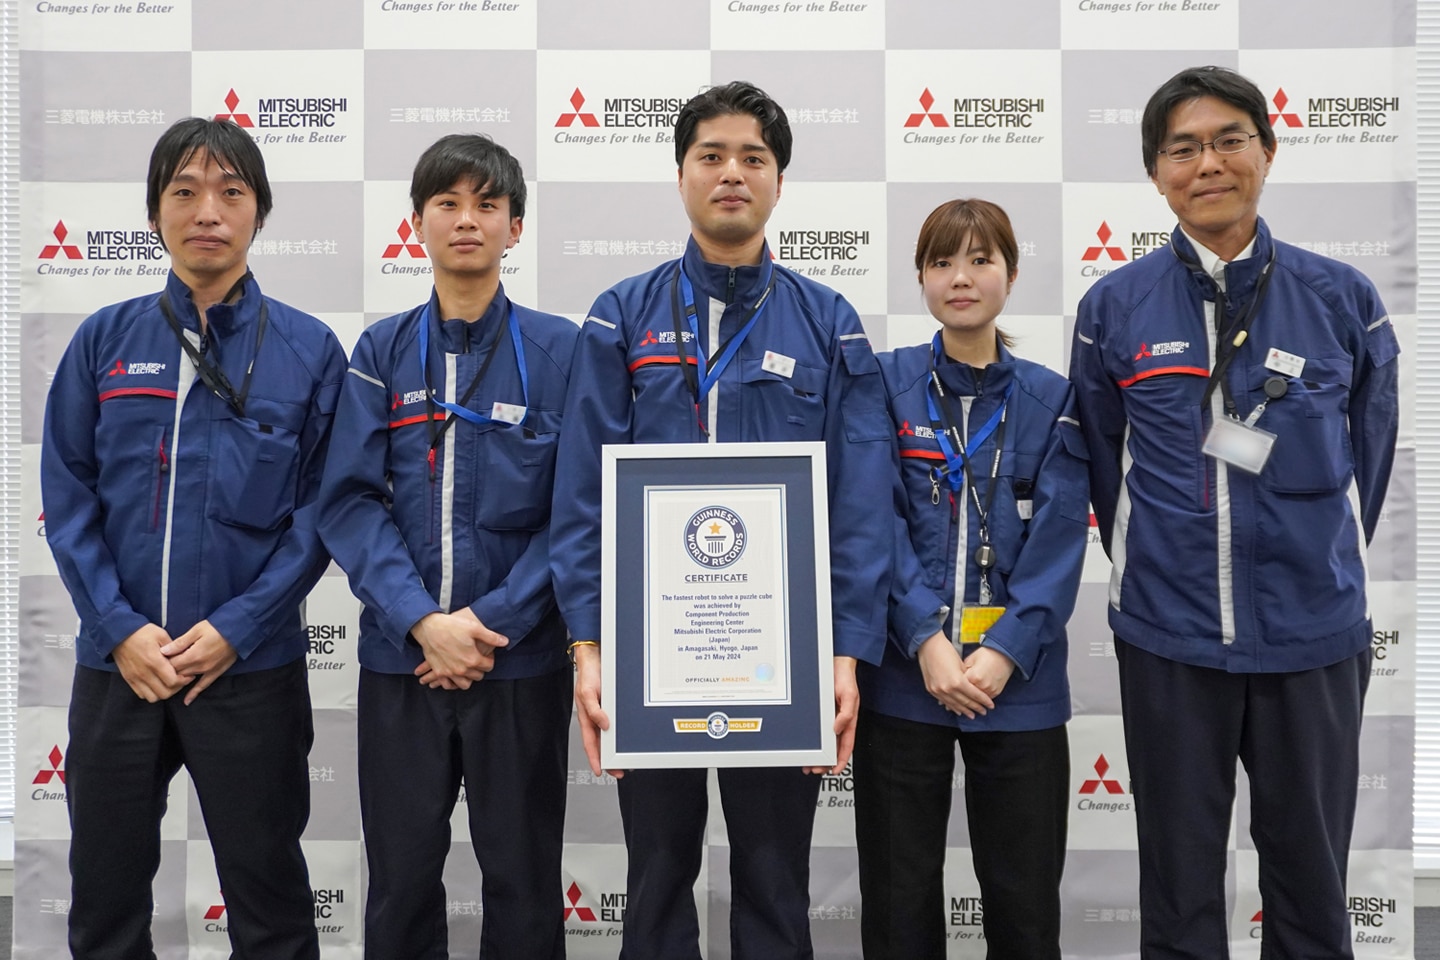 The project team with the GUINNESS WORLD RECORDS certificate in Hyogo, Japan